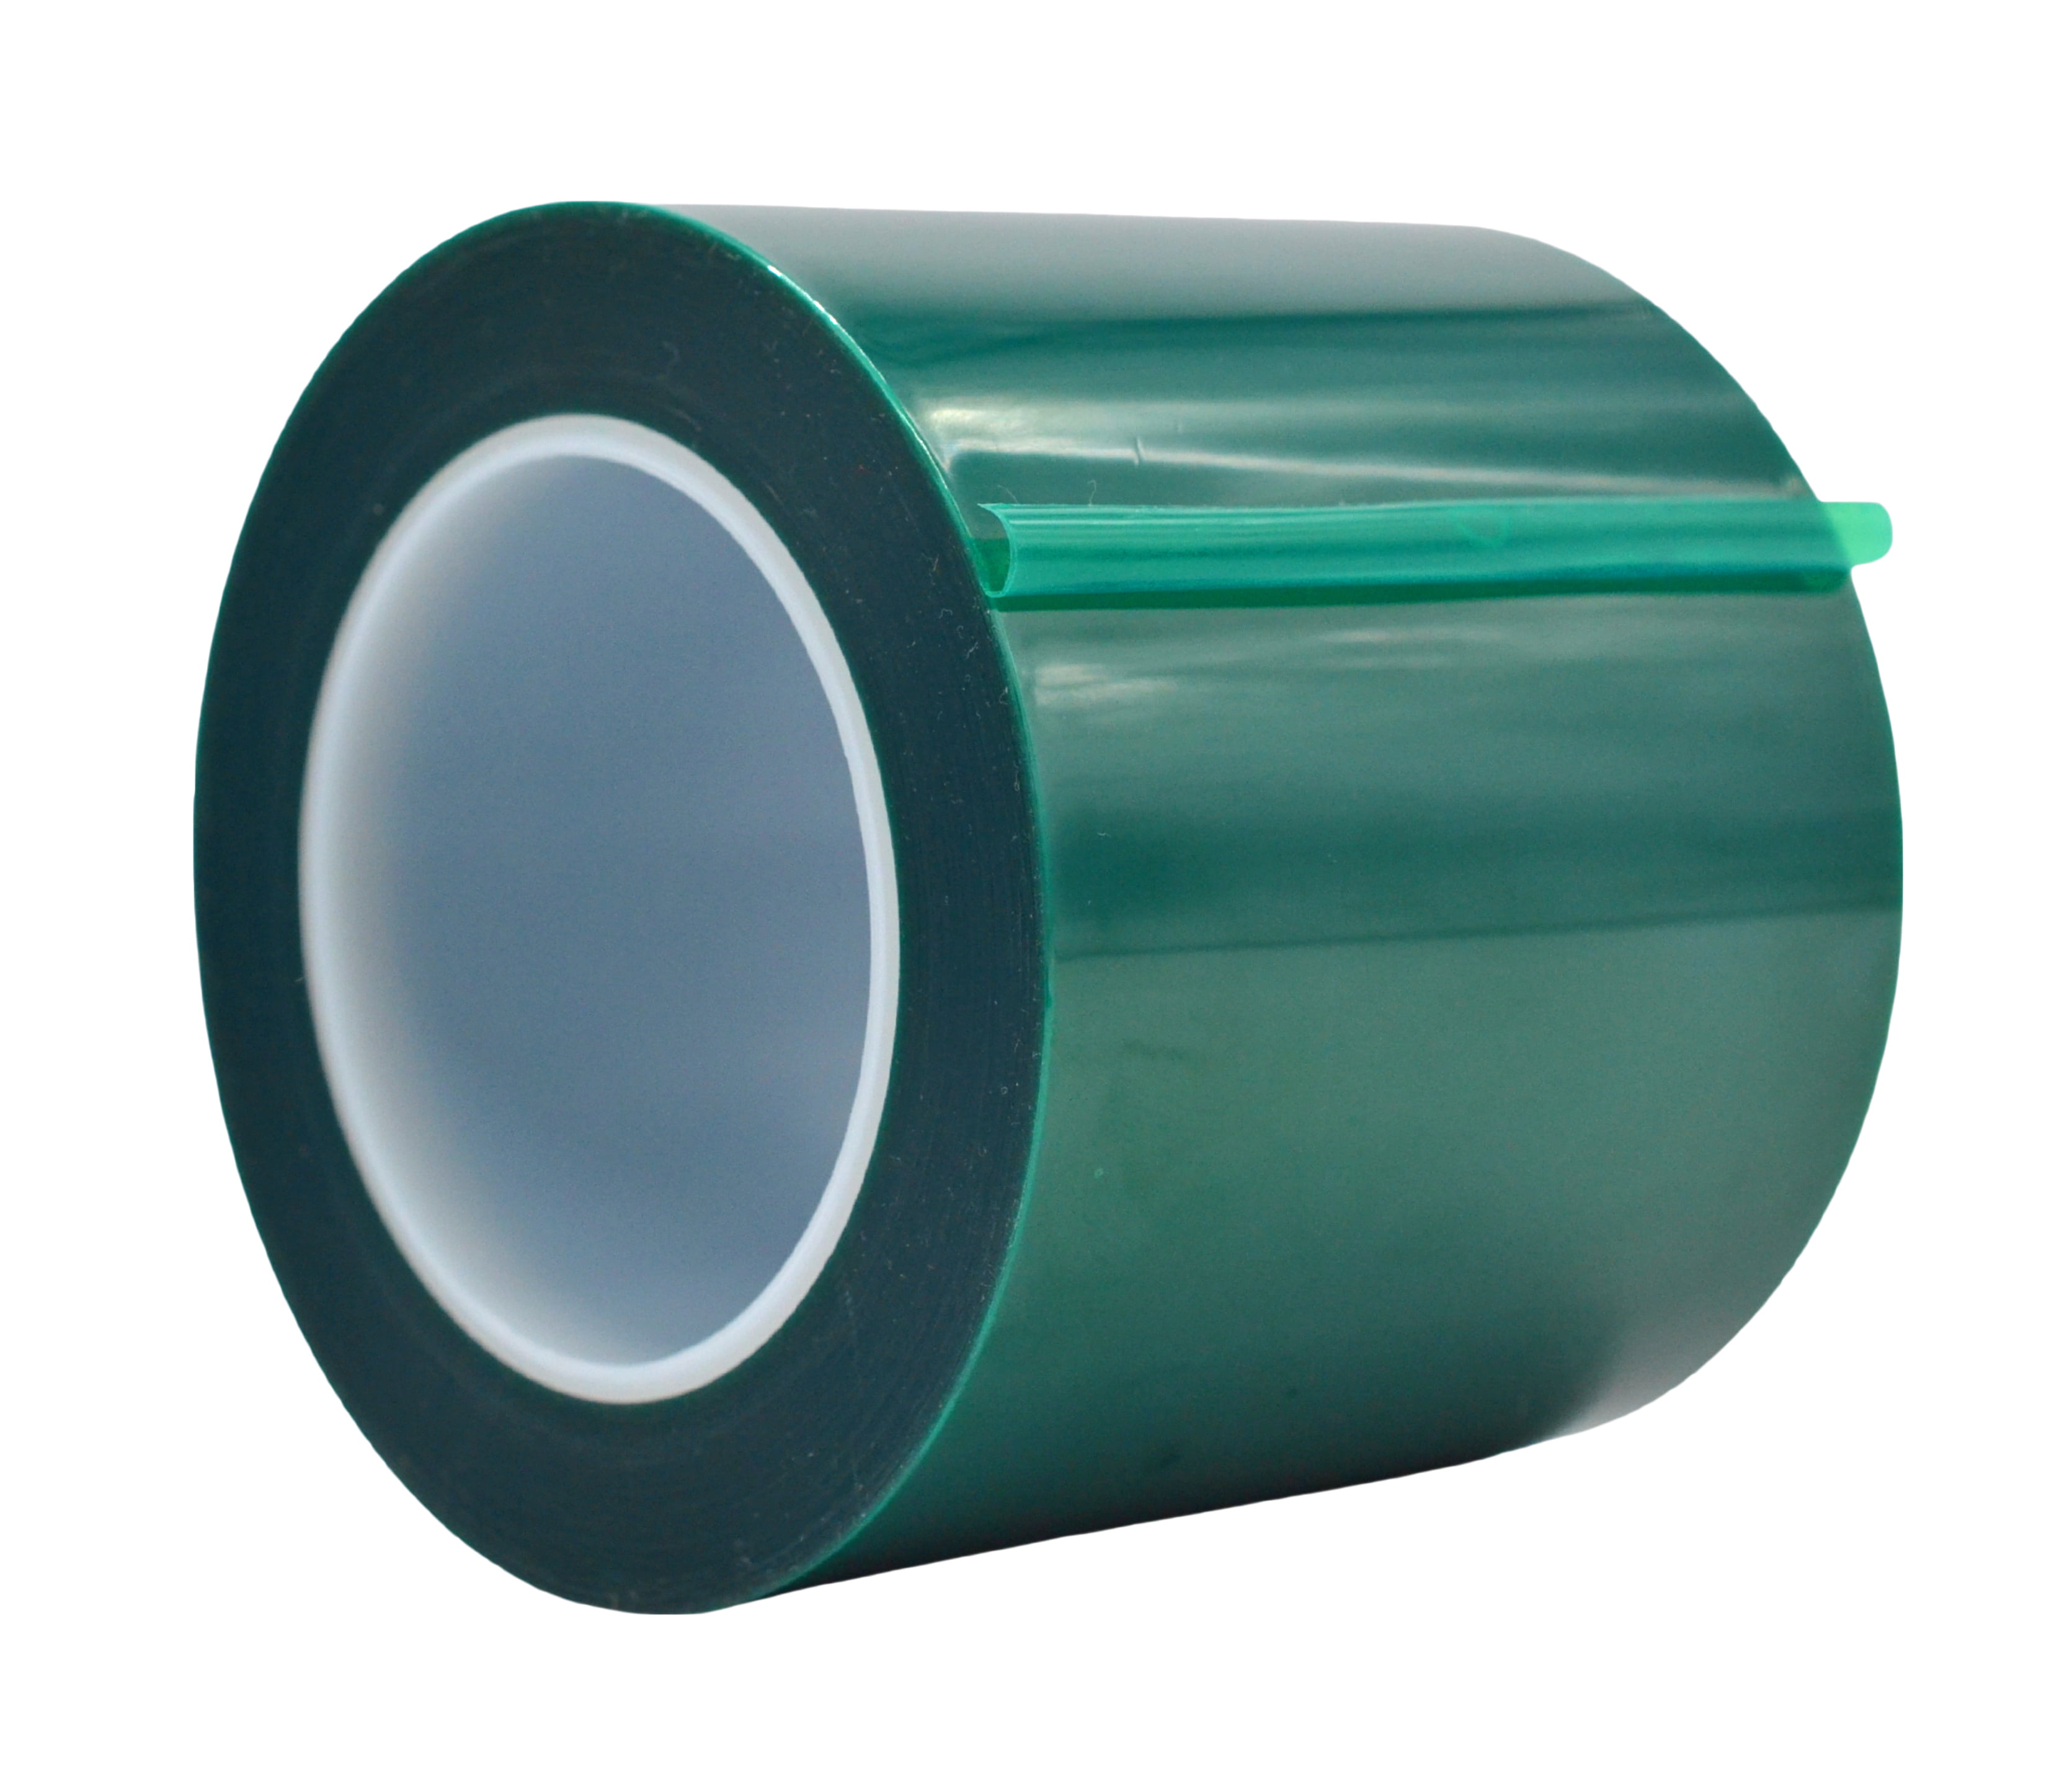 1 INCH HIGH TEMPERATURE POWDER COATING POLYESTER/SILICONE MASKING TAPE GREEN 